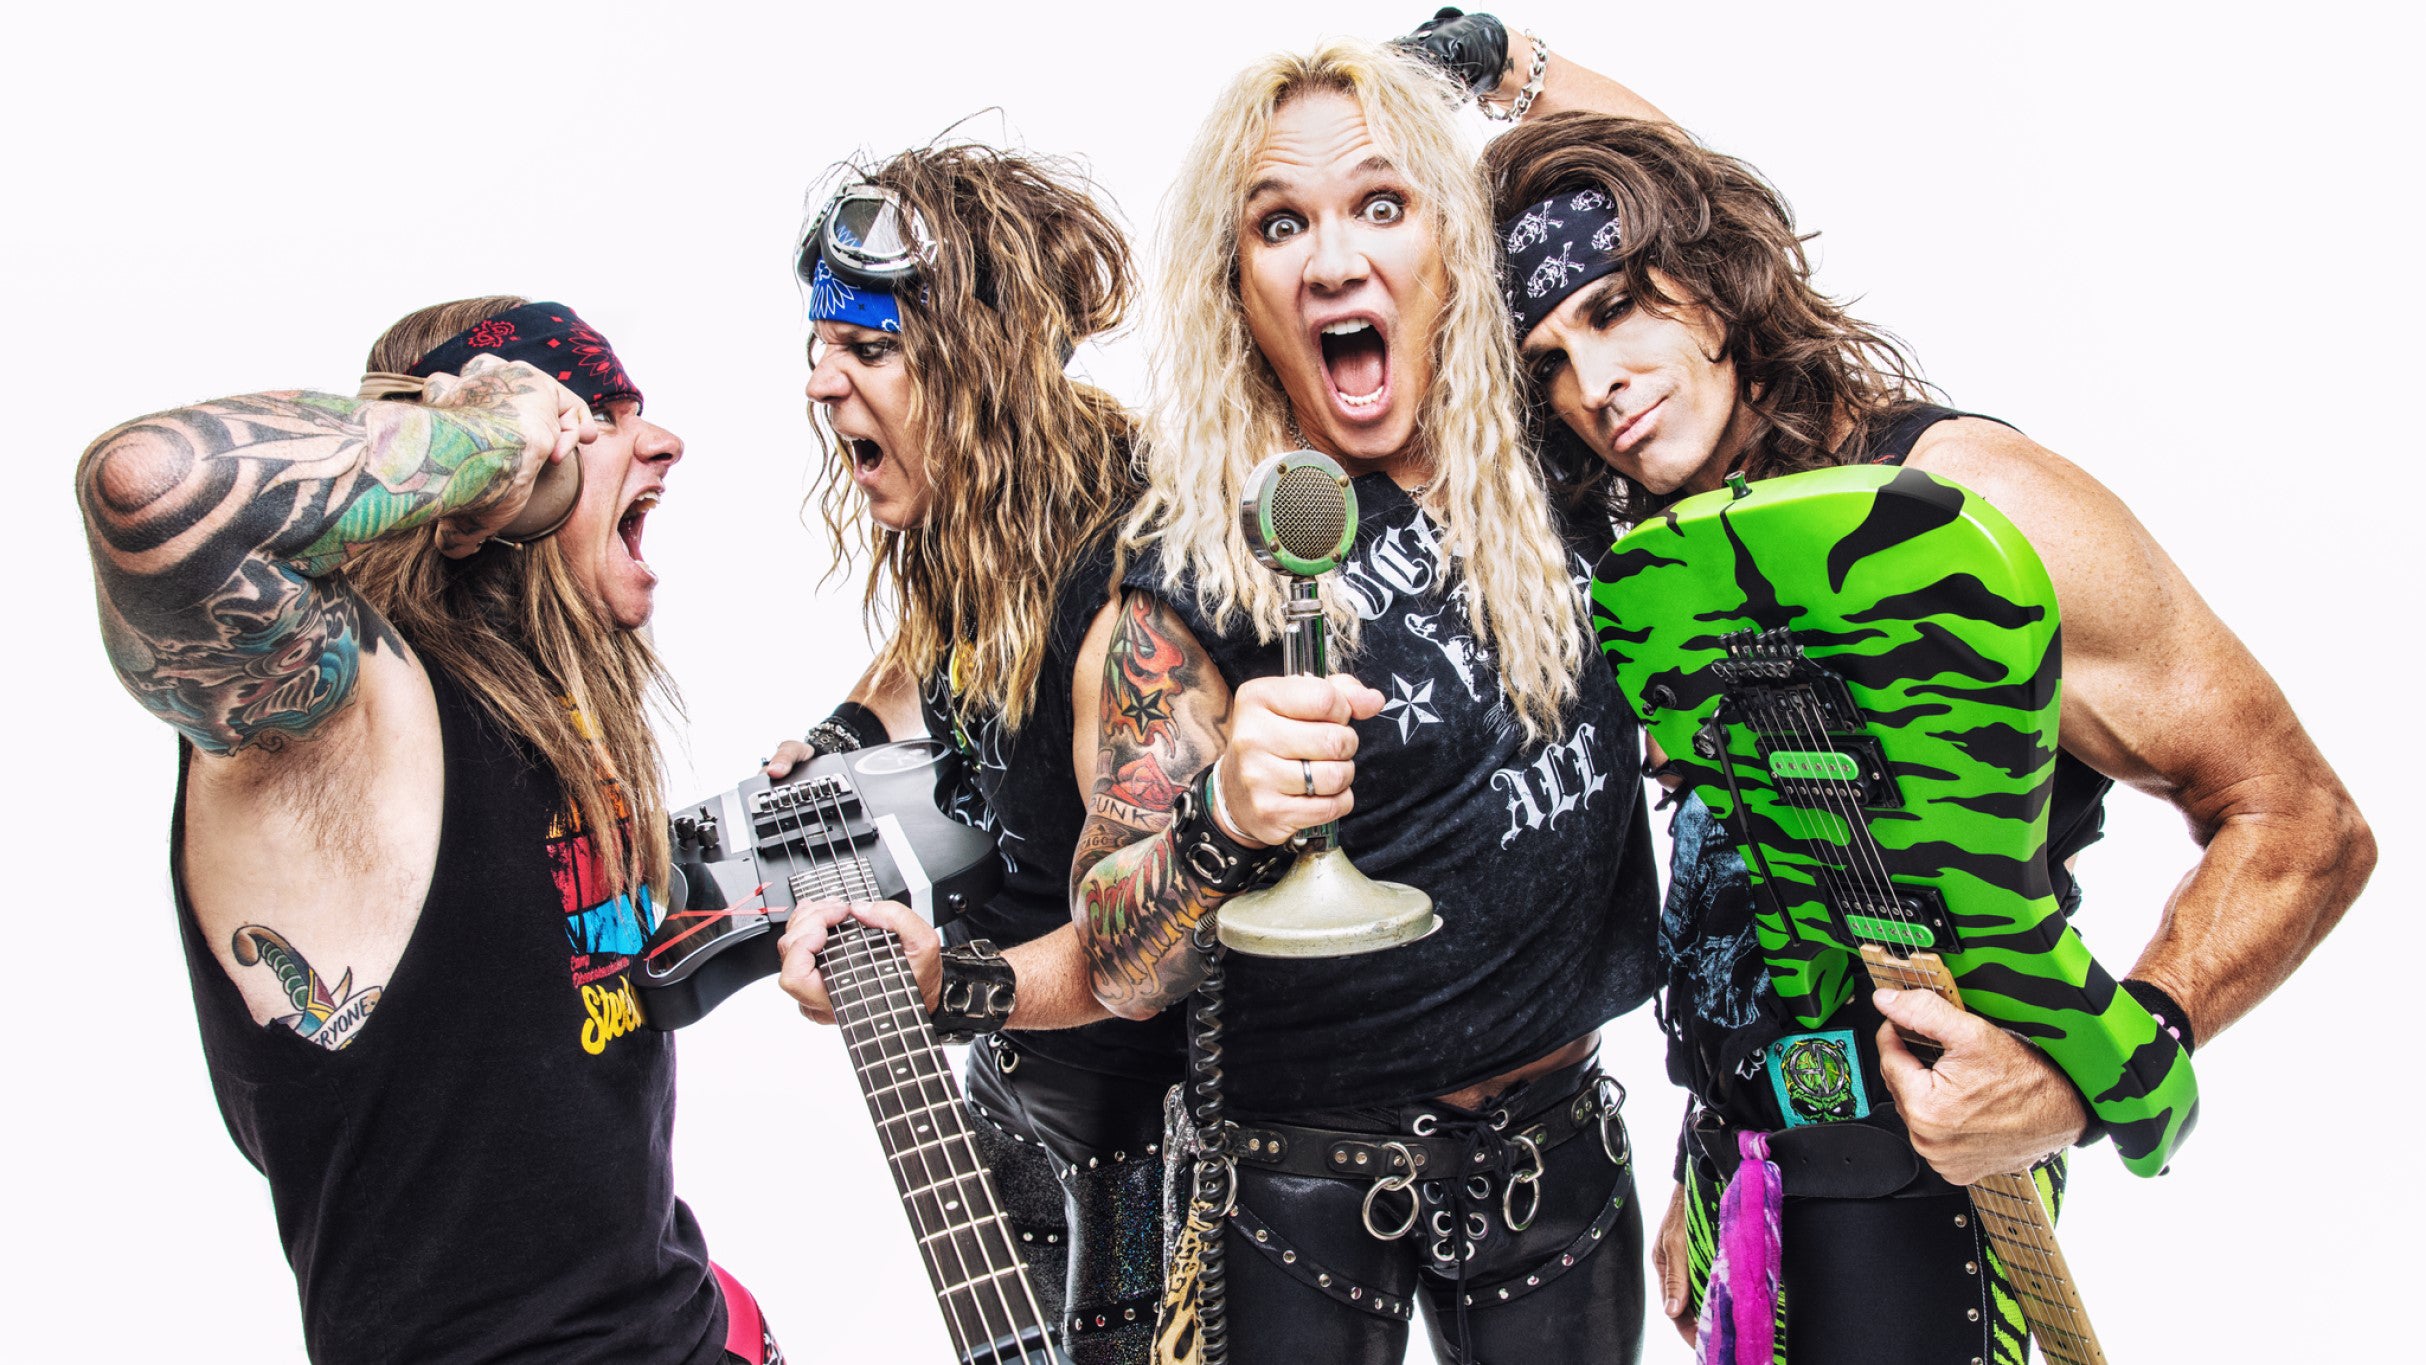 Steel Panther - On The Prowl World Tour in Toronto promo photo for Bandsintown presale offer code